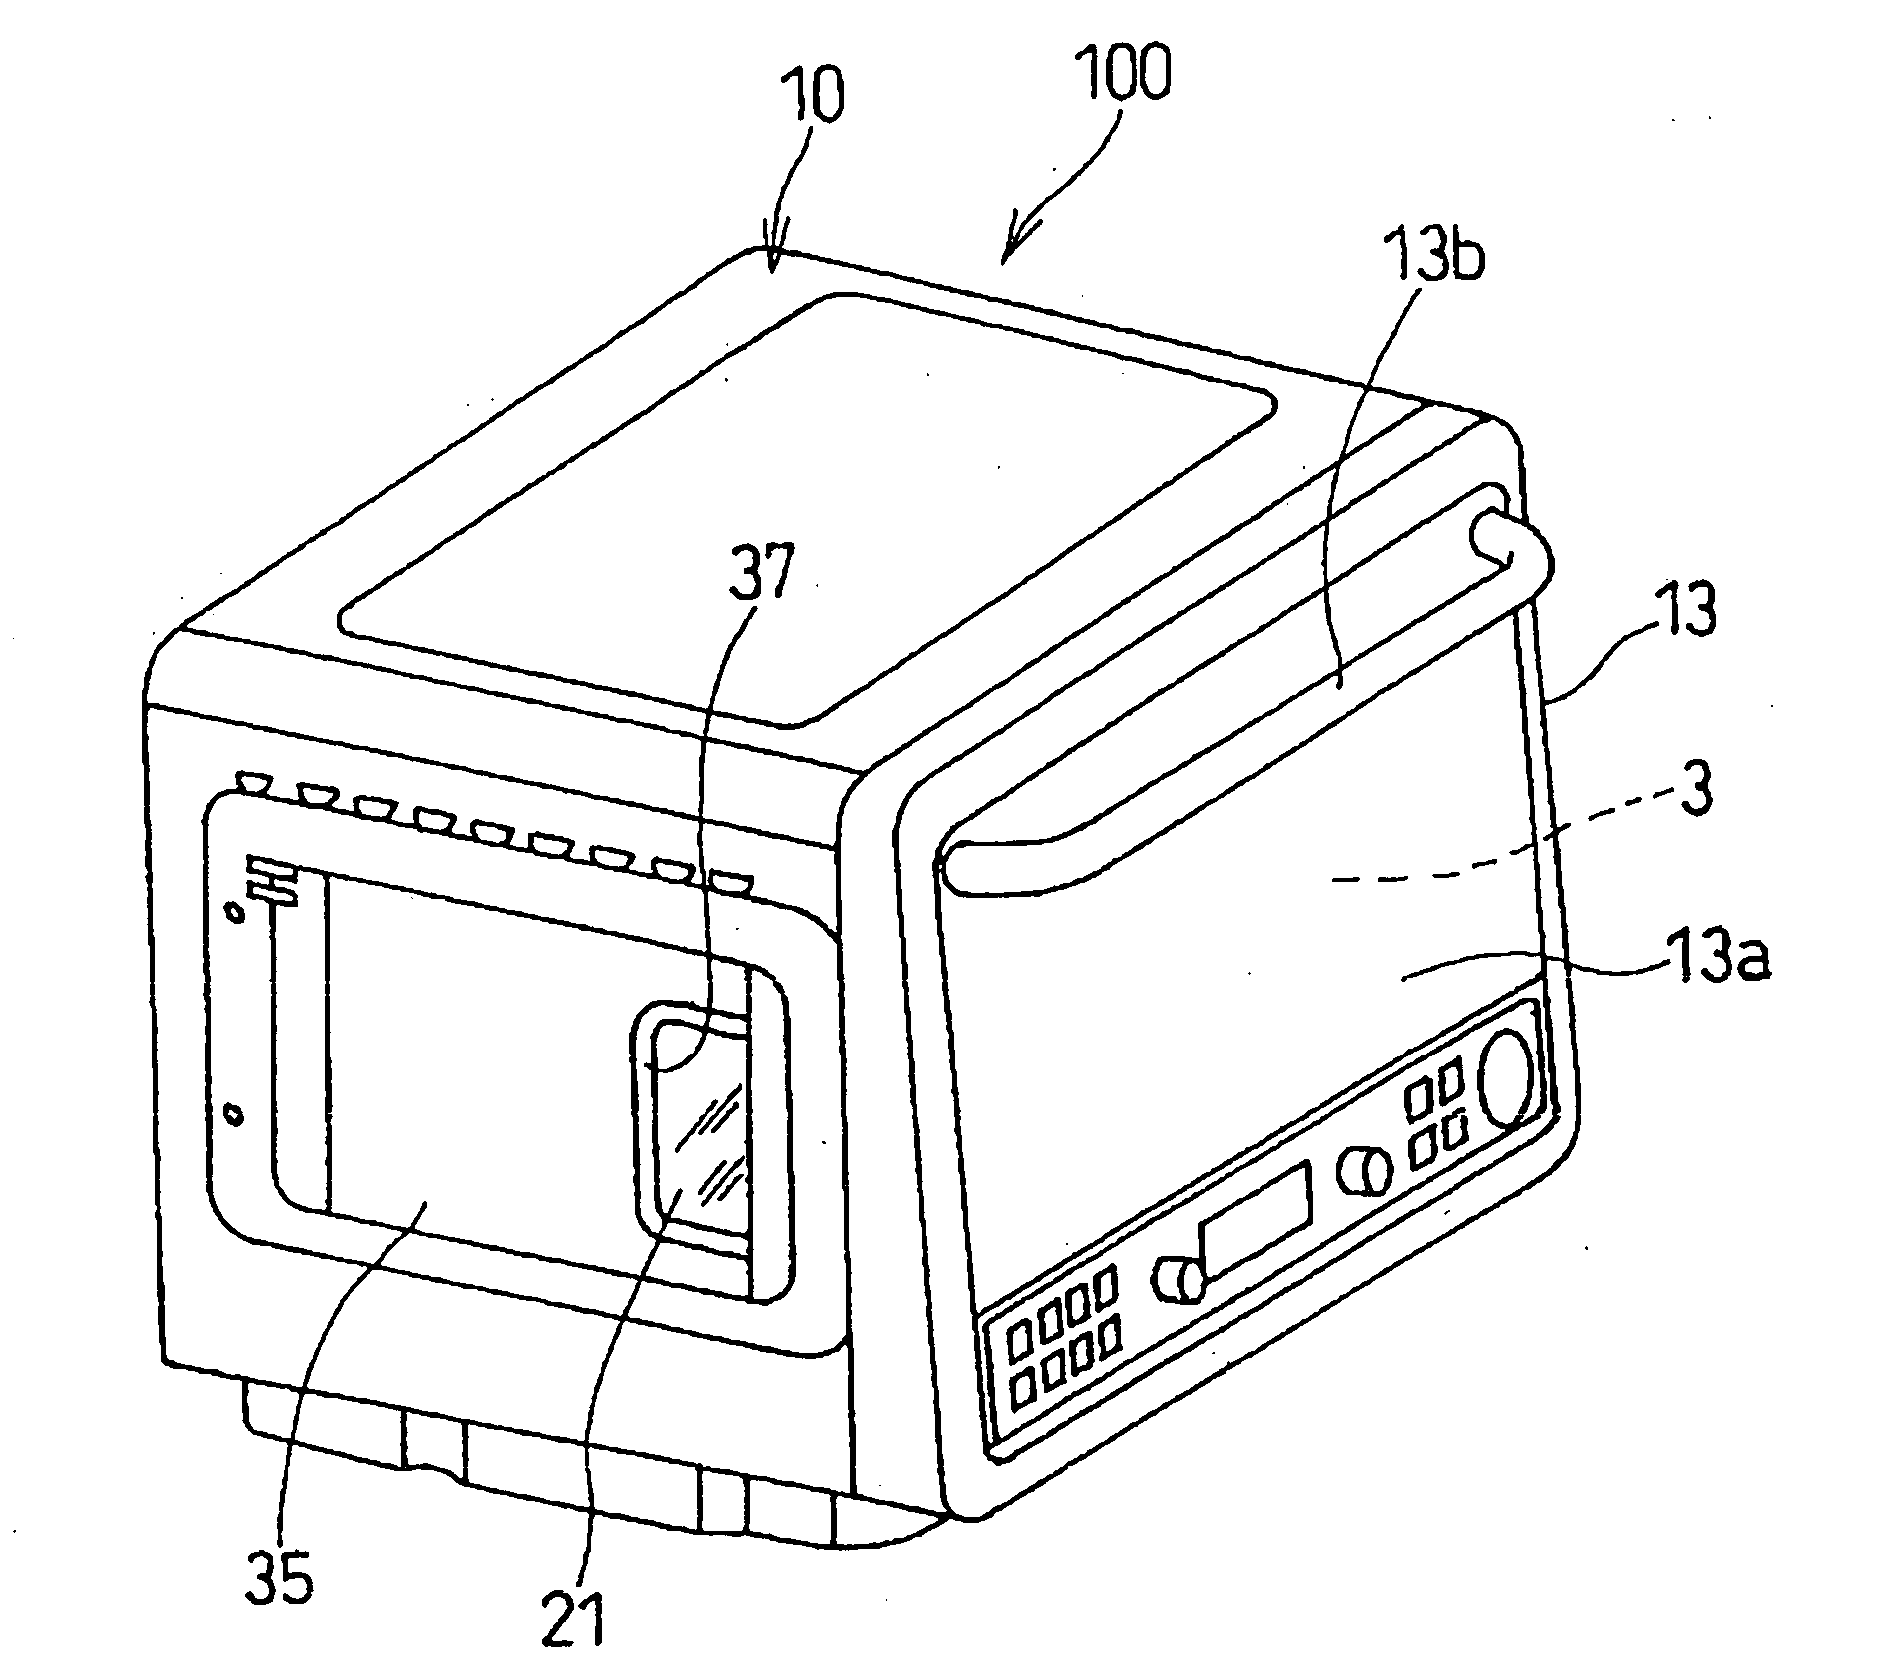 High frequency heating device with steam generating function